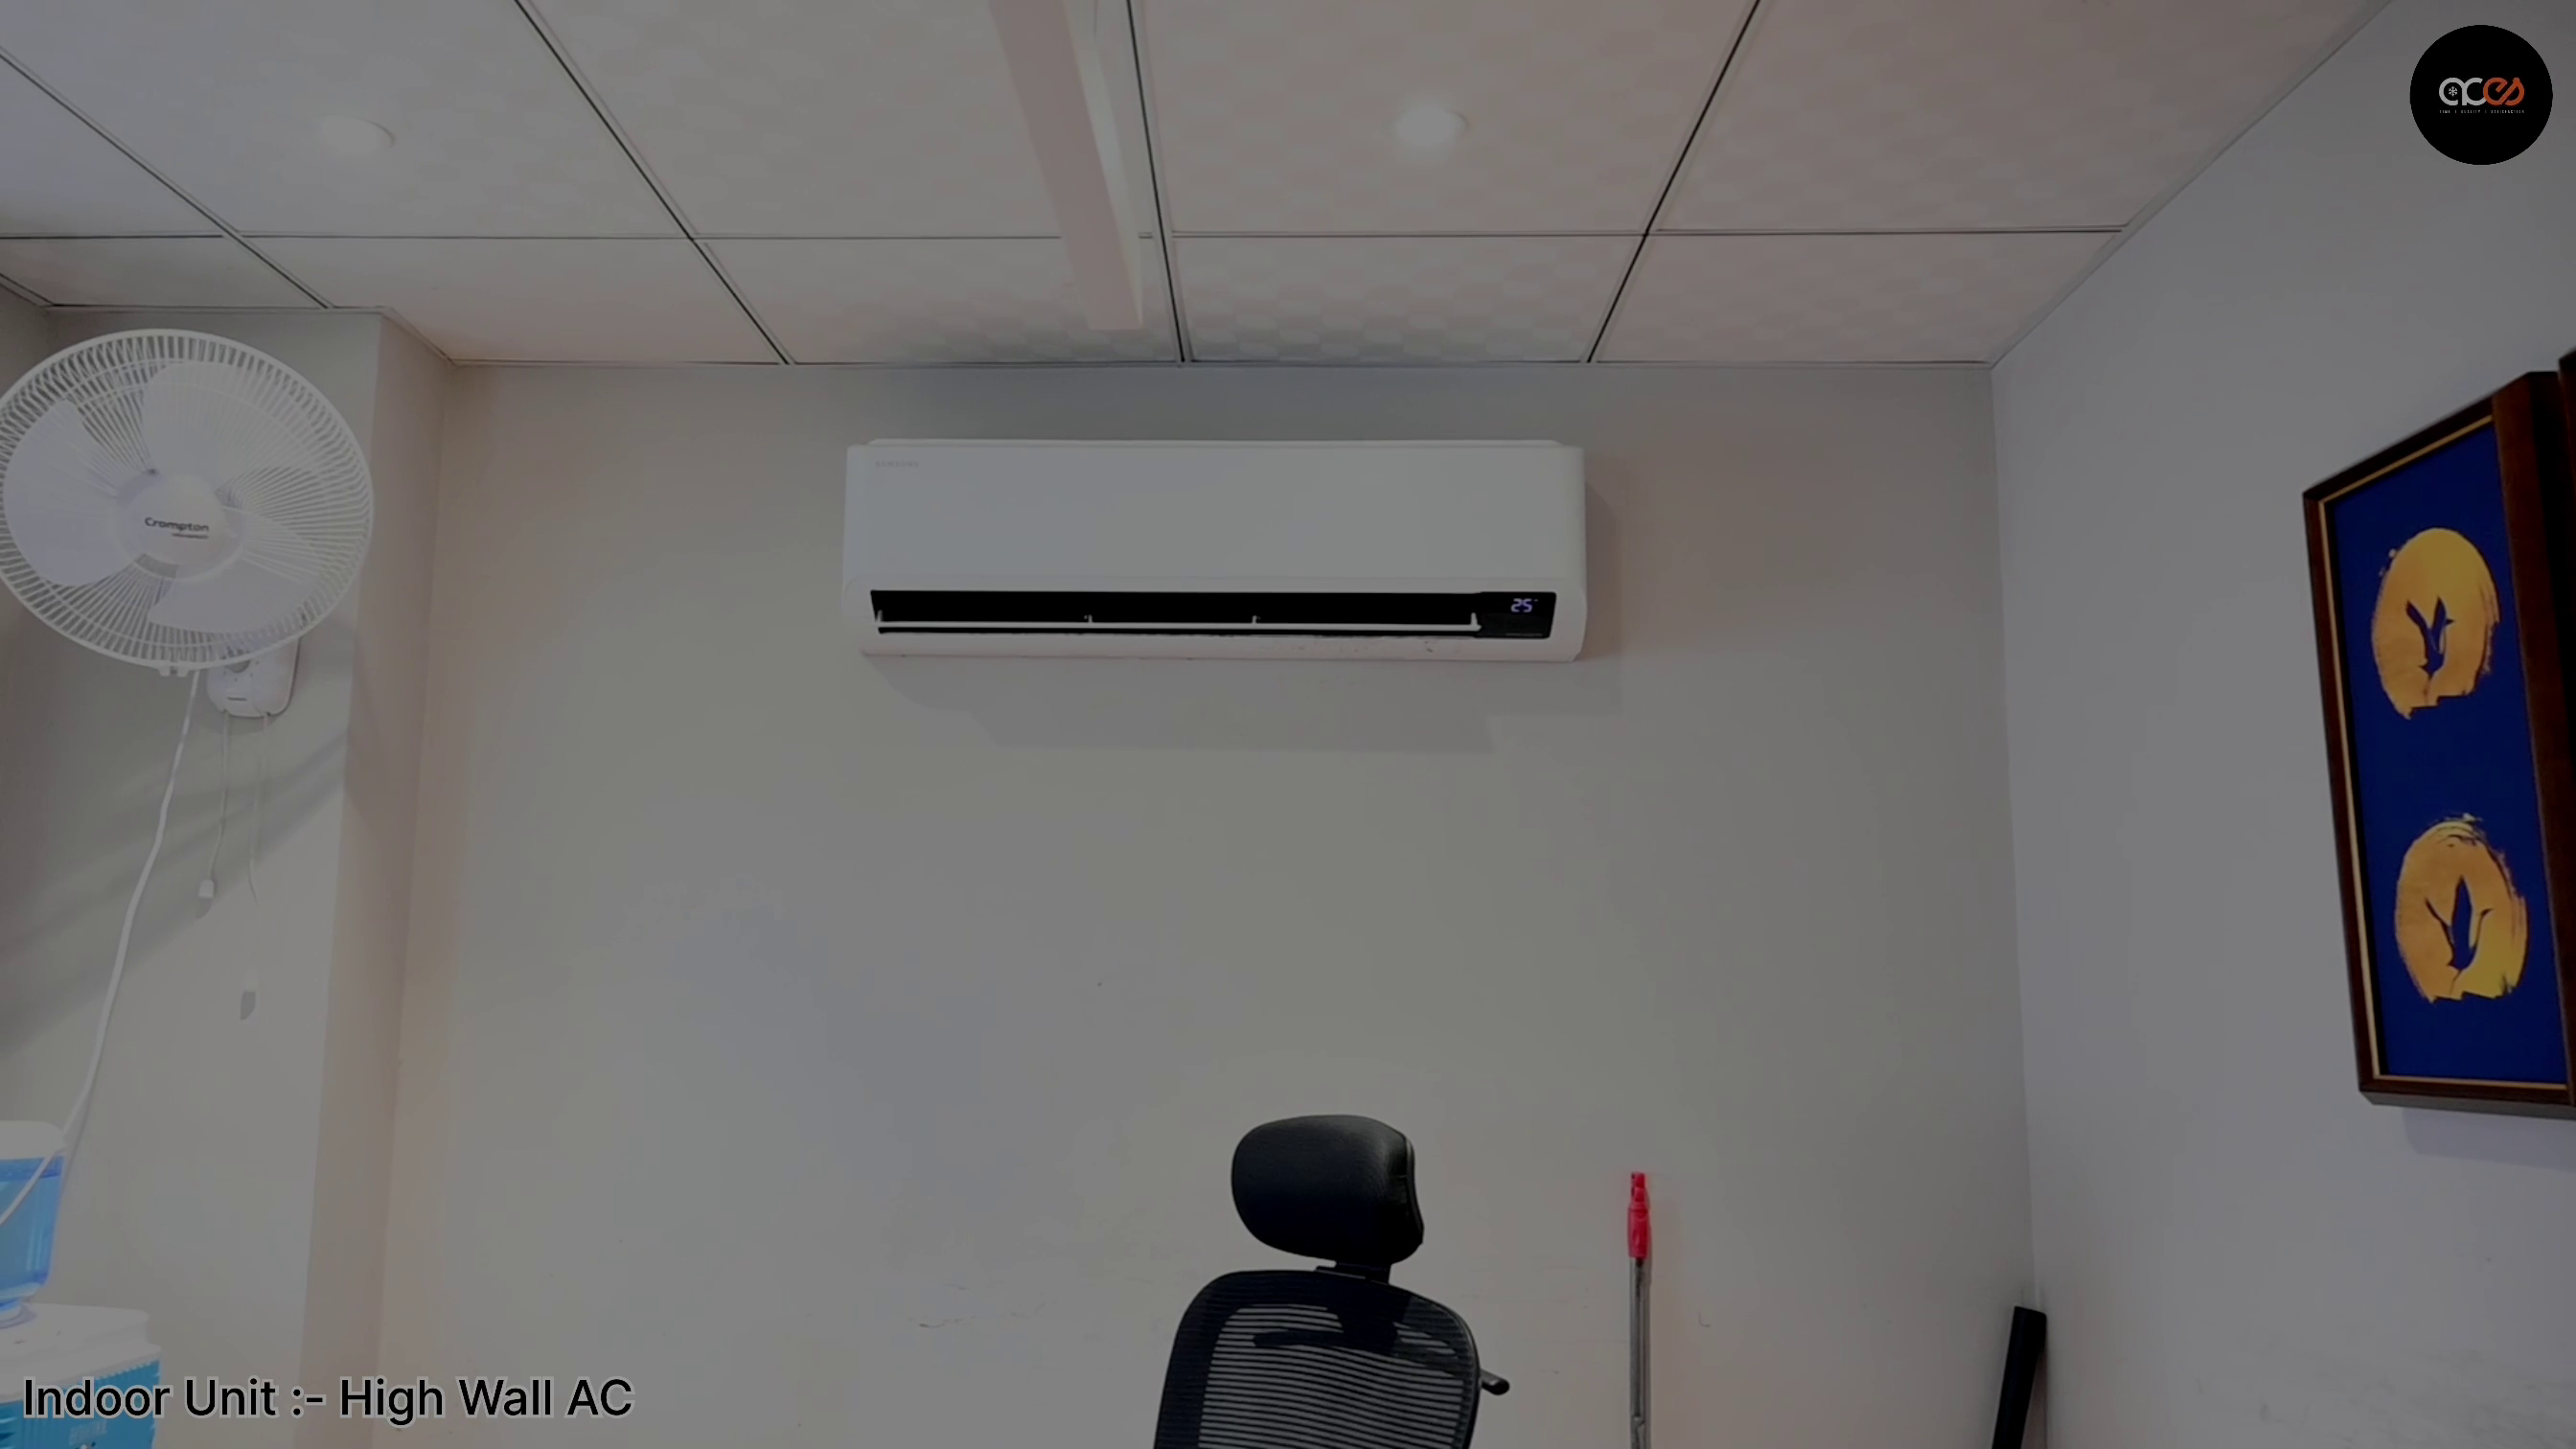 Samsung split ac installed in office by ACES